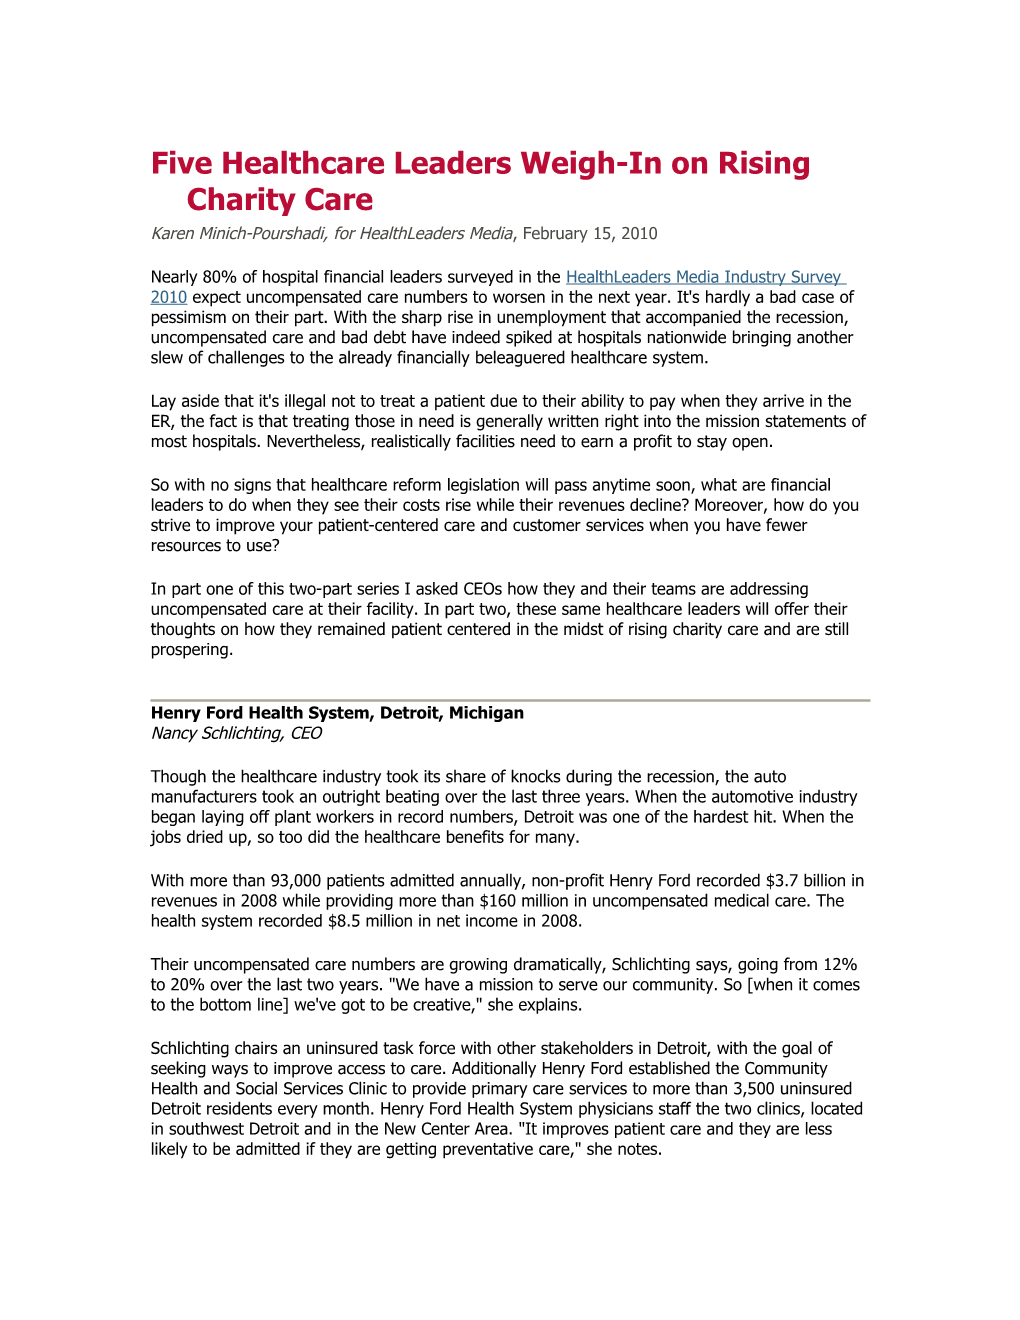 Five Healthcare Leaders Weigh-In on Rising Charity Care